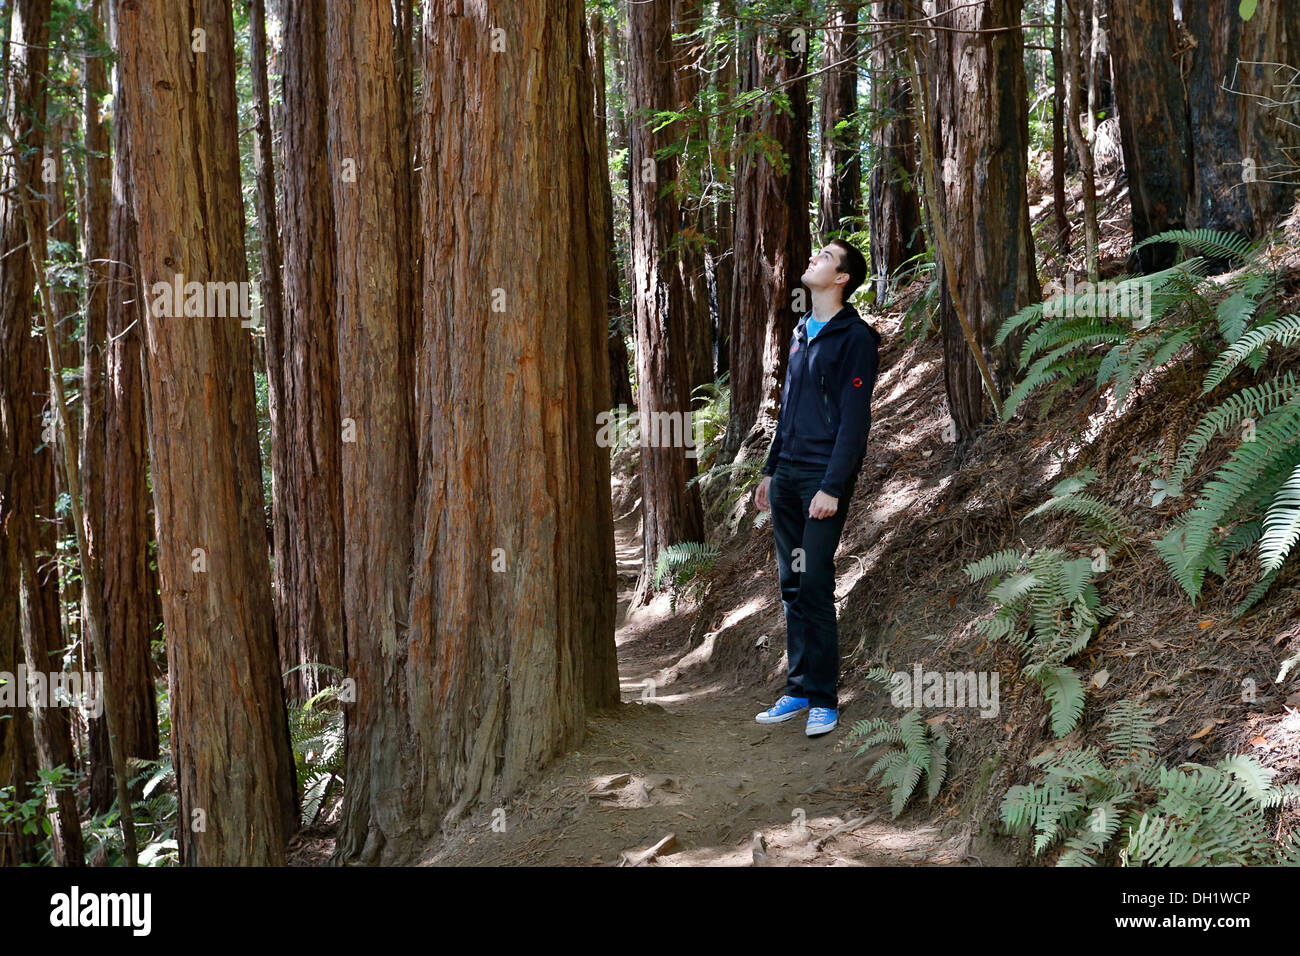 Muir Woods National Monument, California, USA Banque D'Images